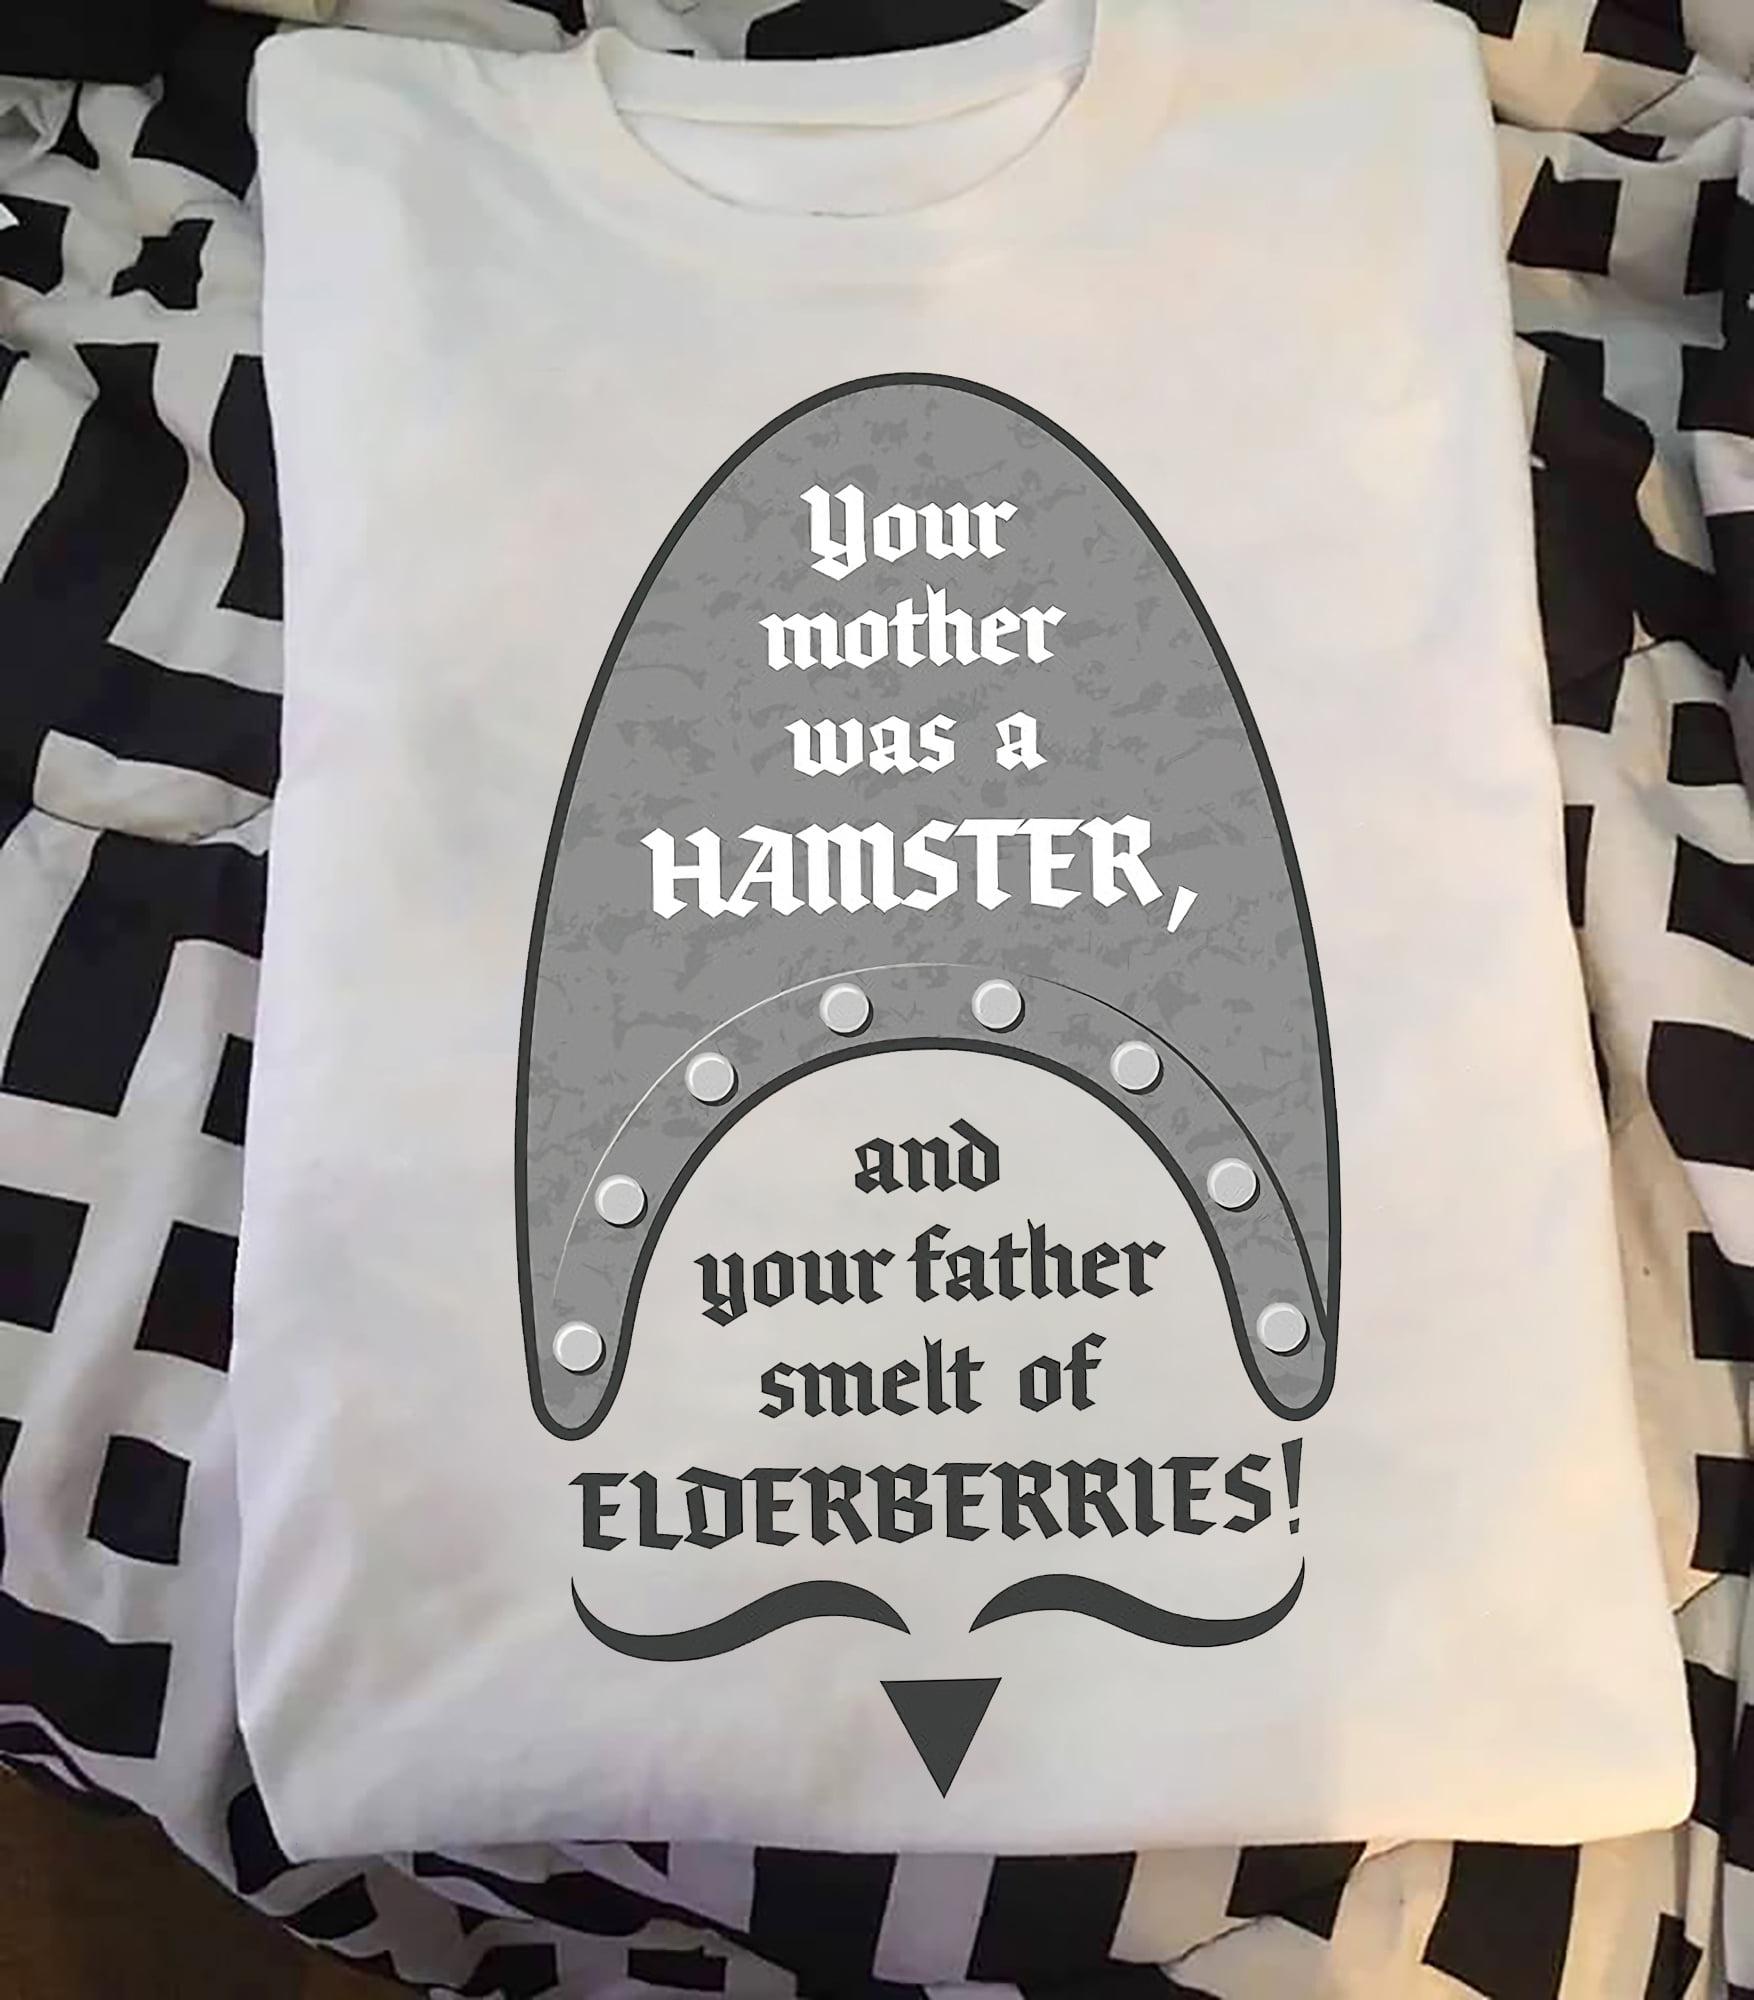 Your mother was a hamster! And your father smelt of elderberries! - Monty Python French Taunter